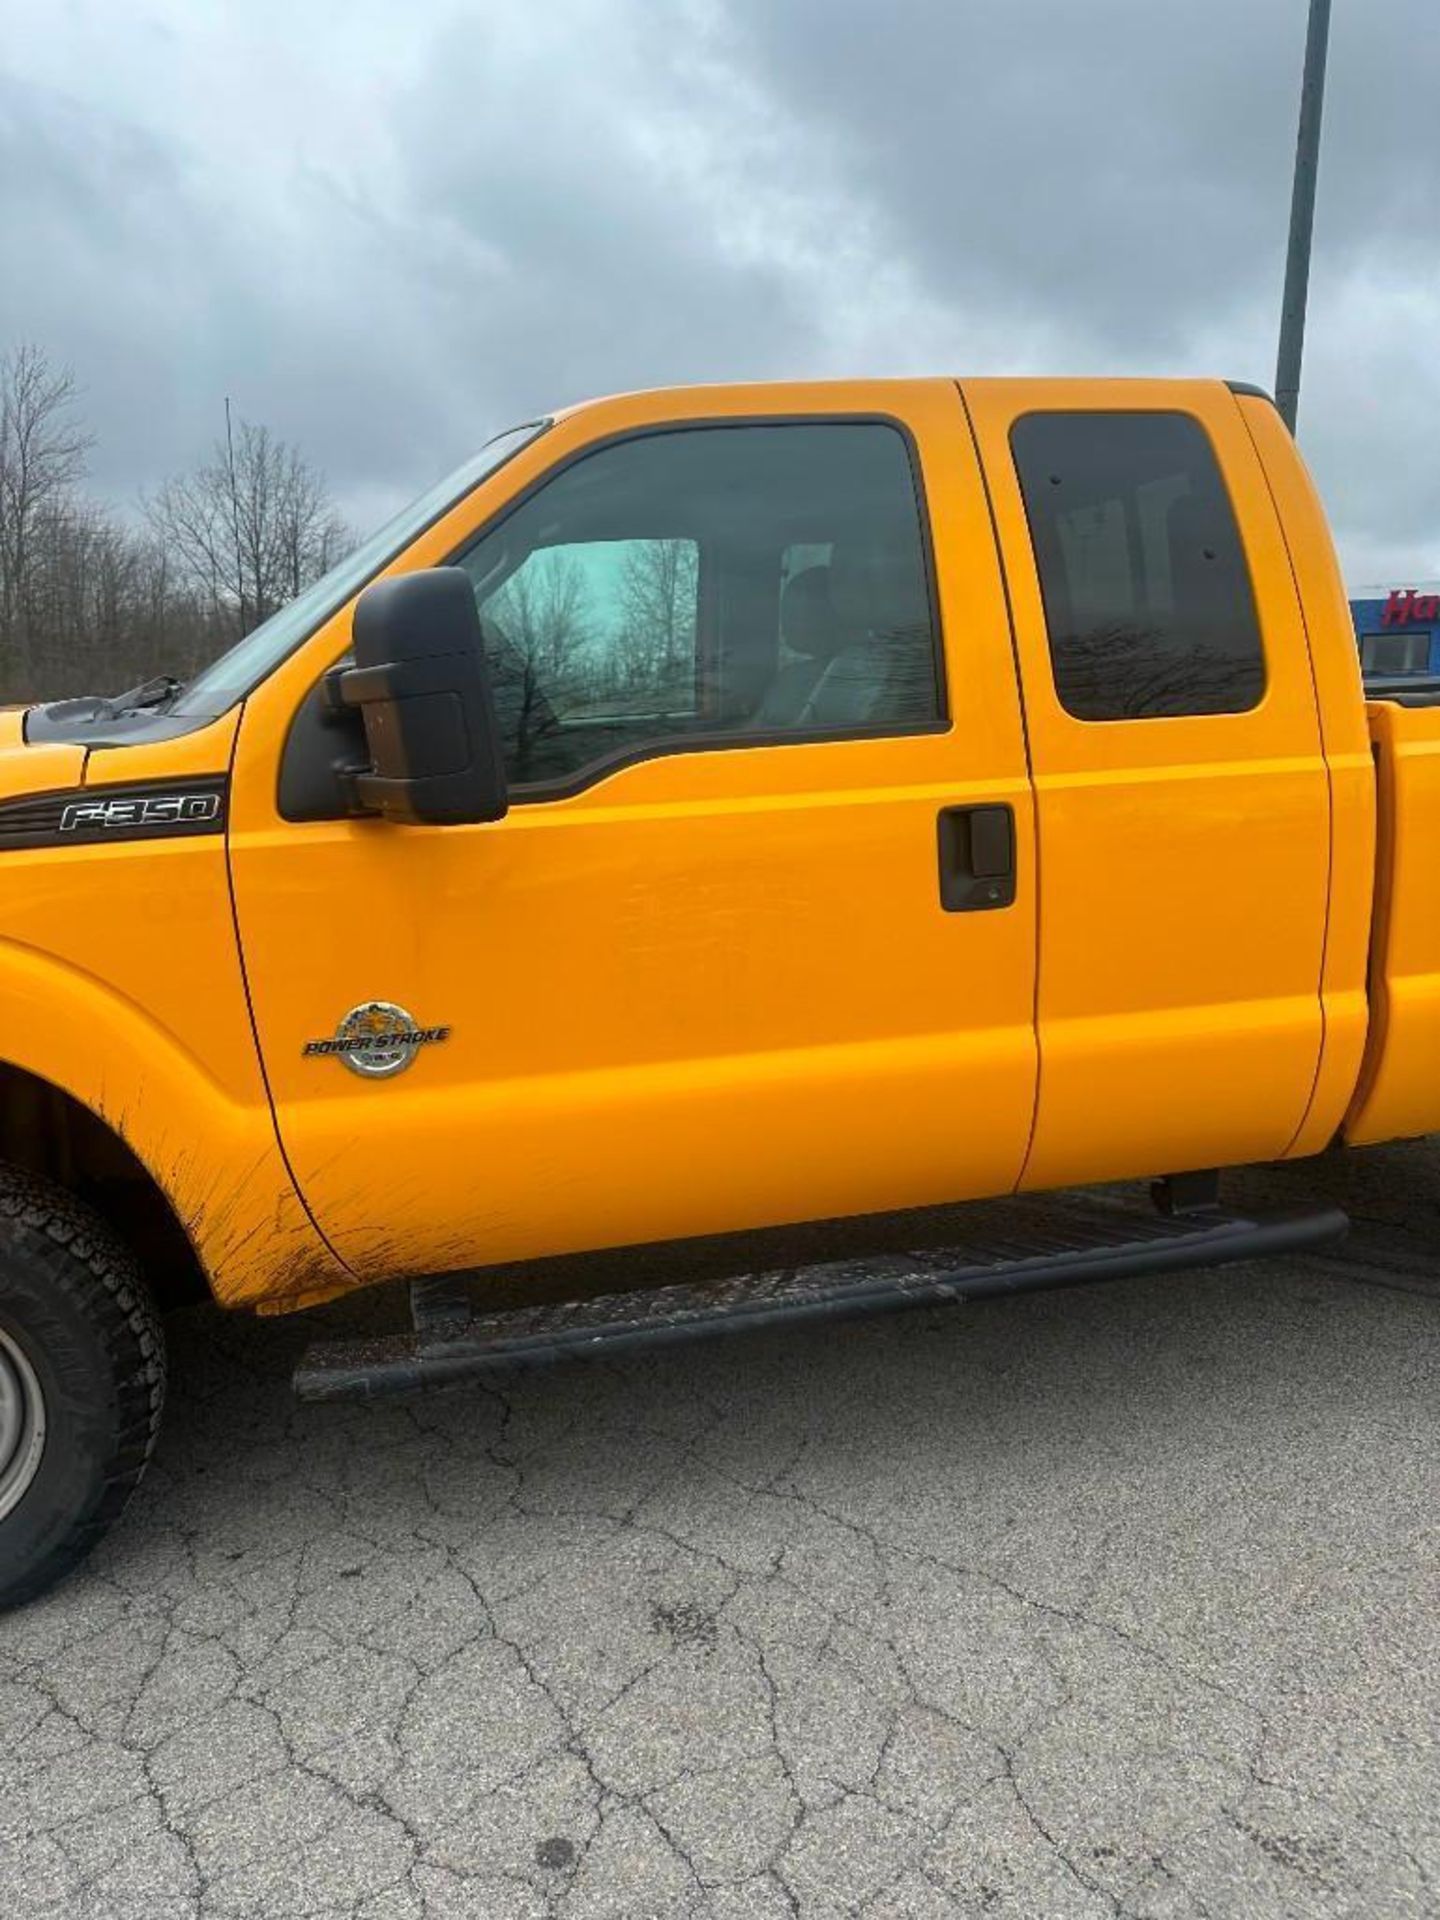 2012 Ford F-350 Pickup Truck (located off-site, please read description) - Image 2 of 14